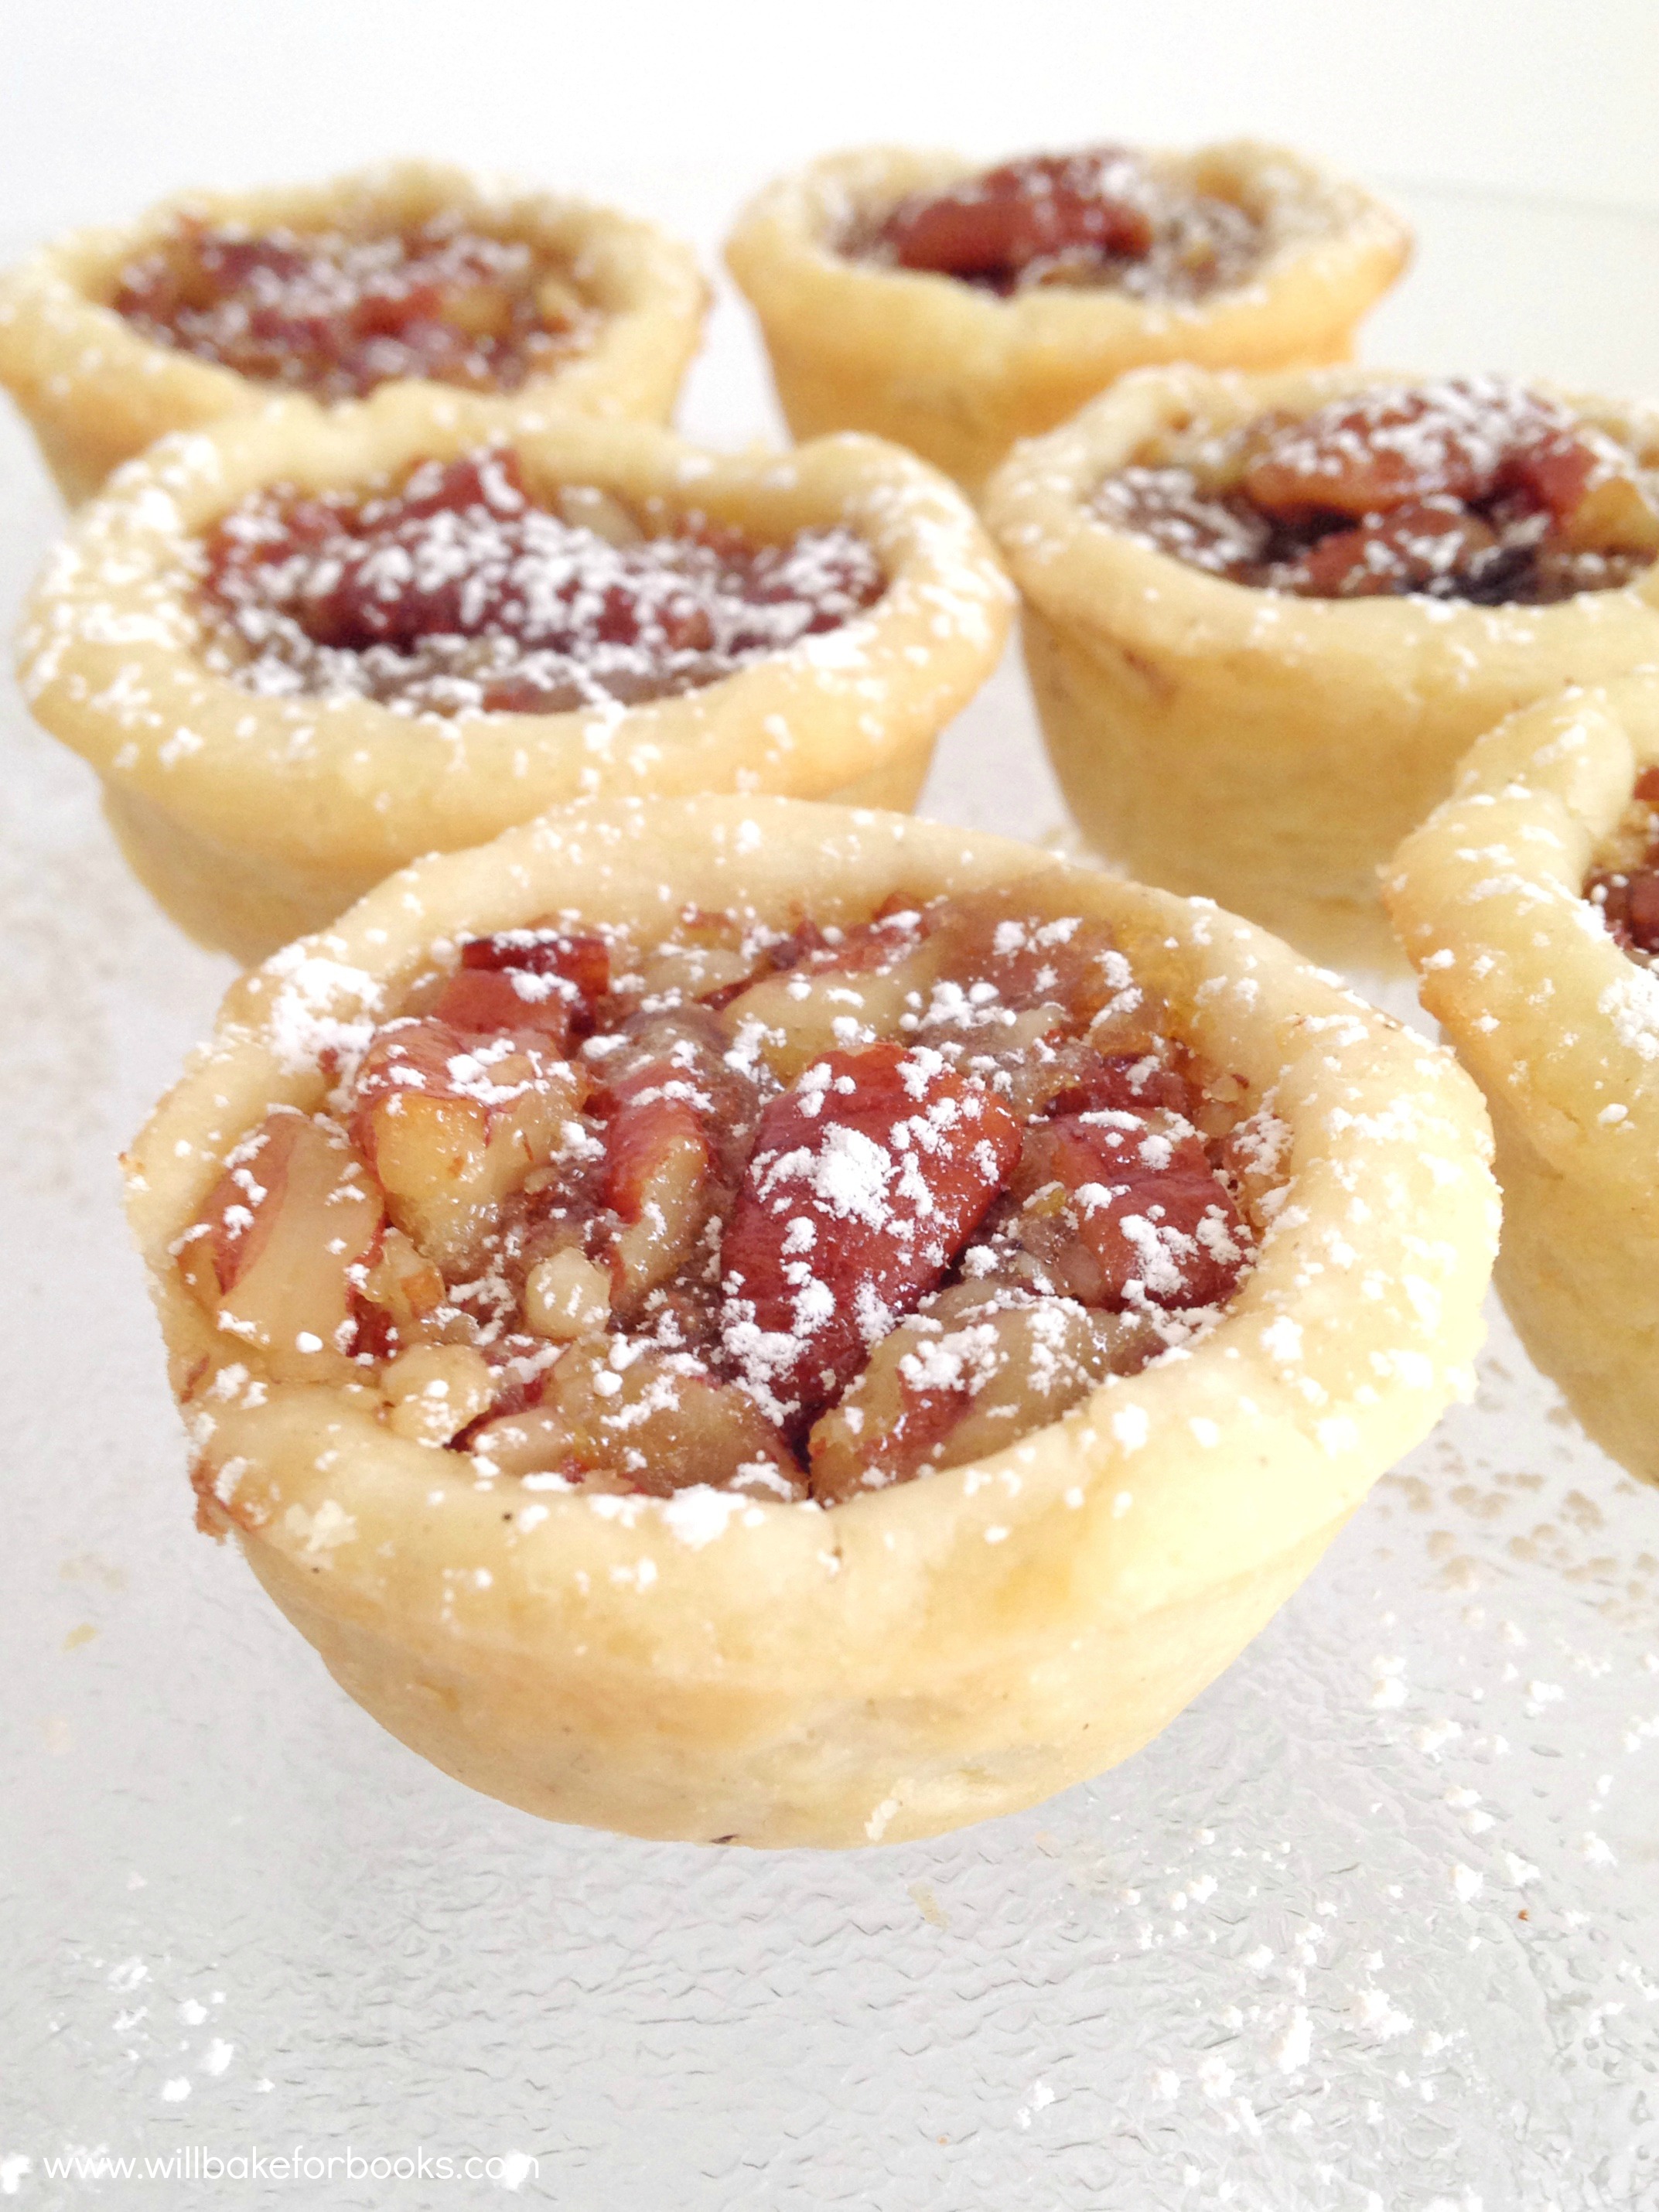 Maple Pecan Pie Bites | Check out the recipe on www.willbakeforbooks.com!